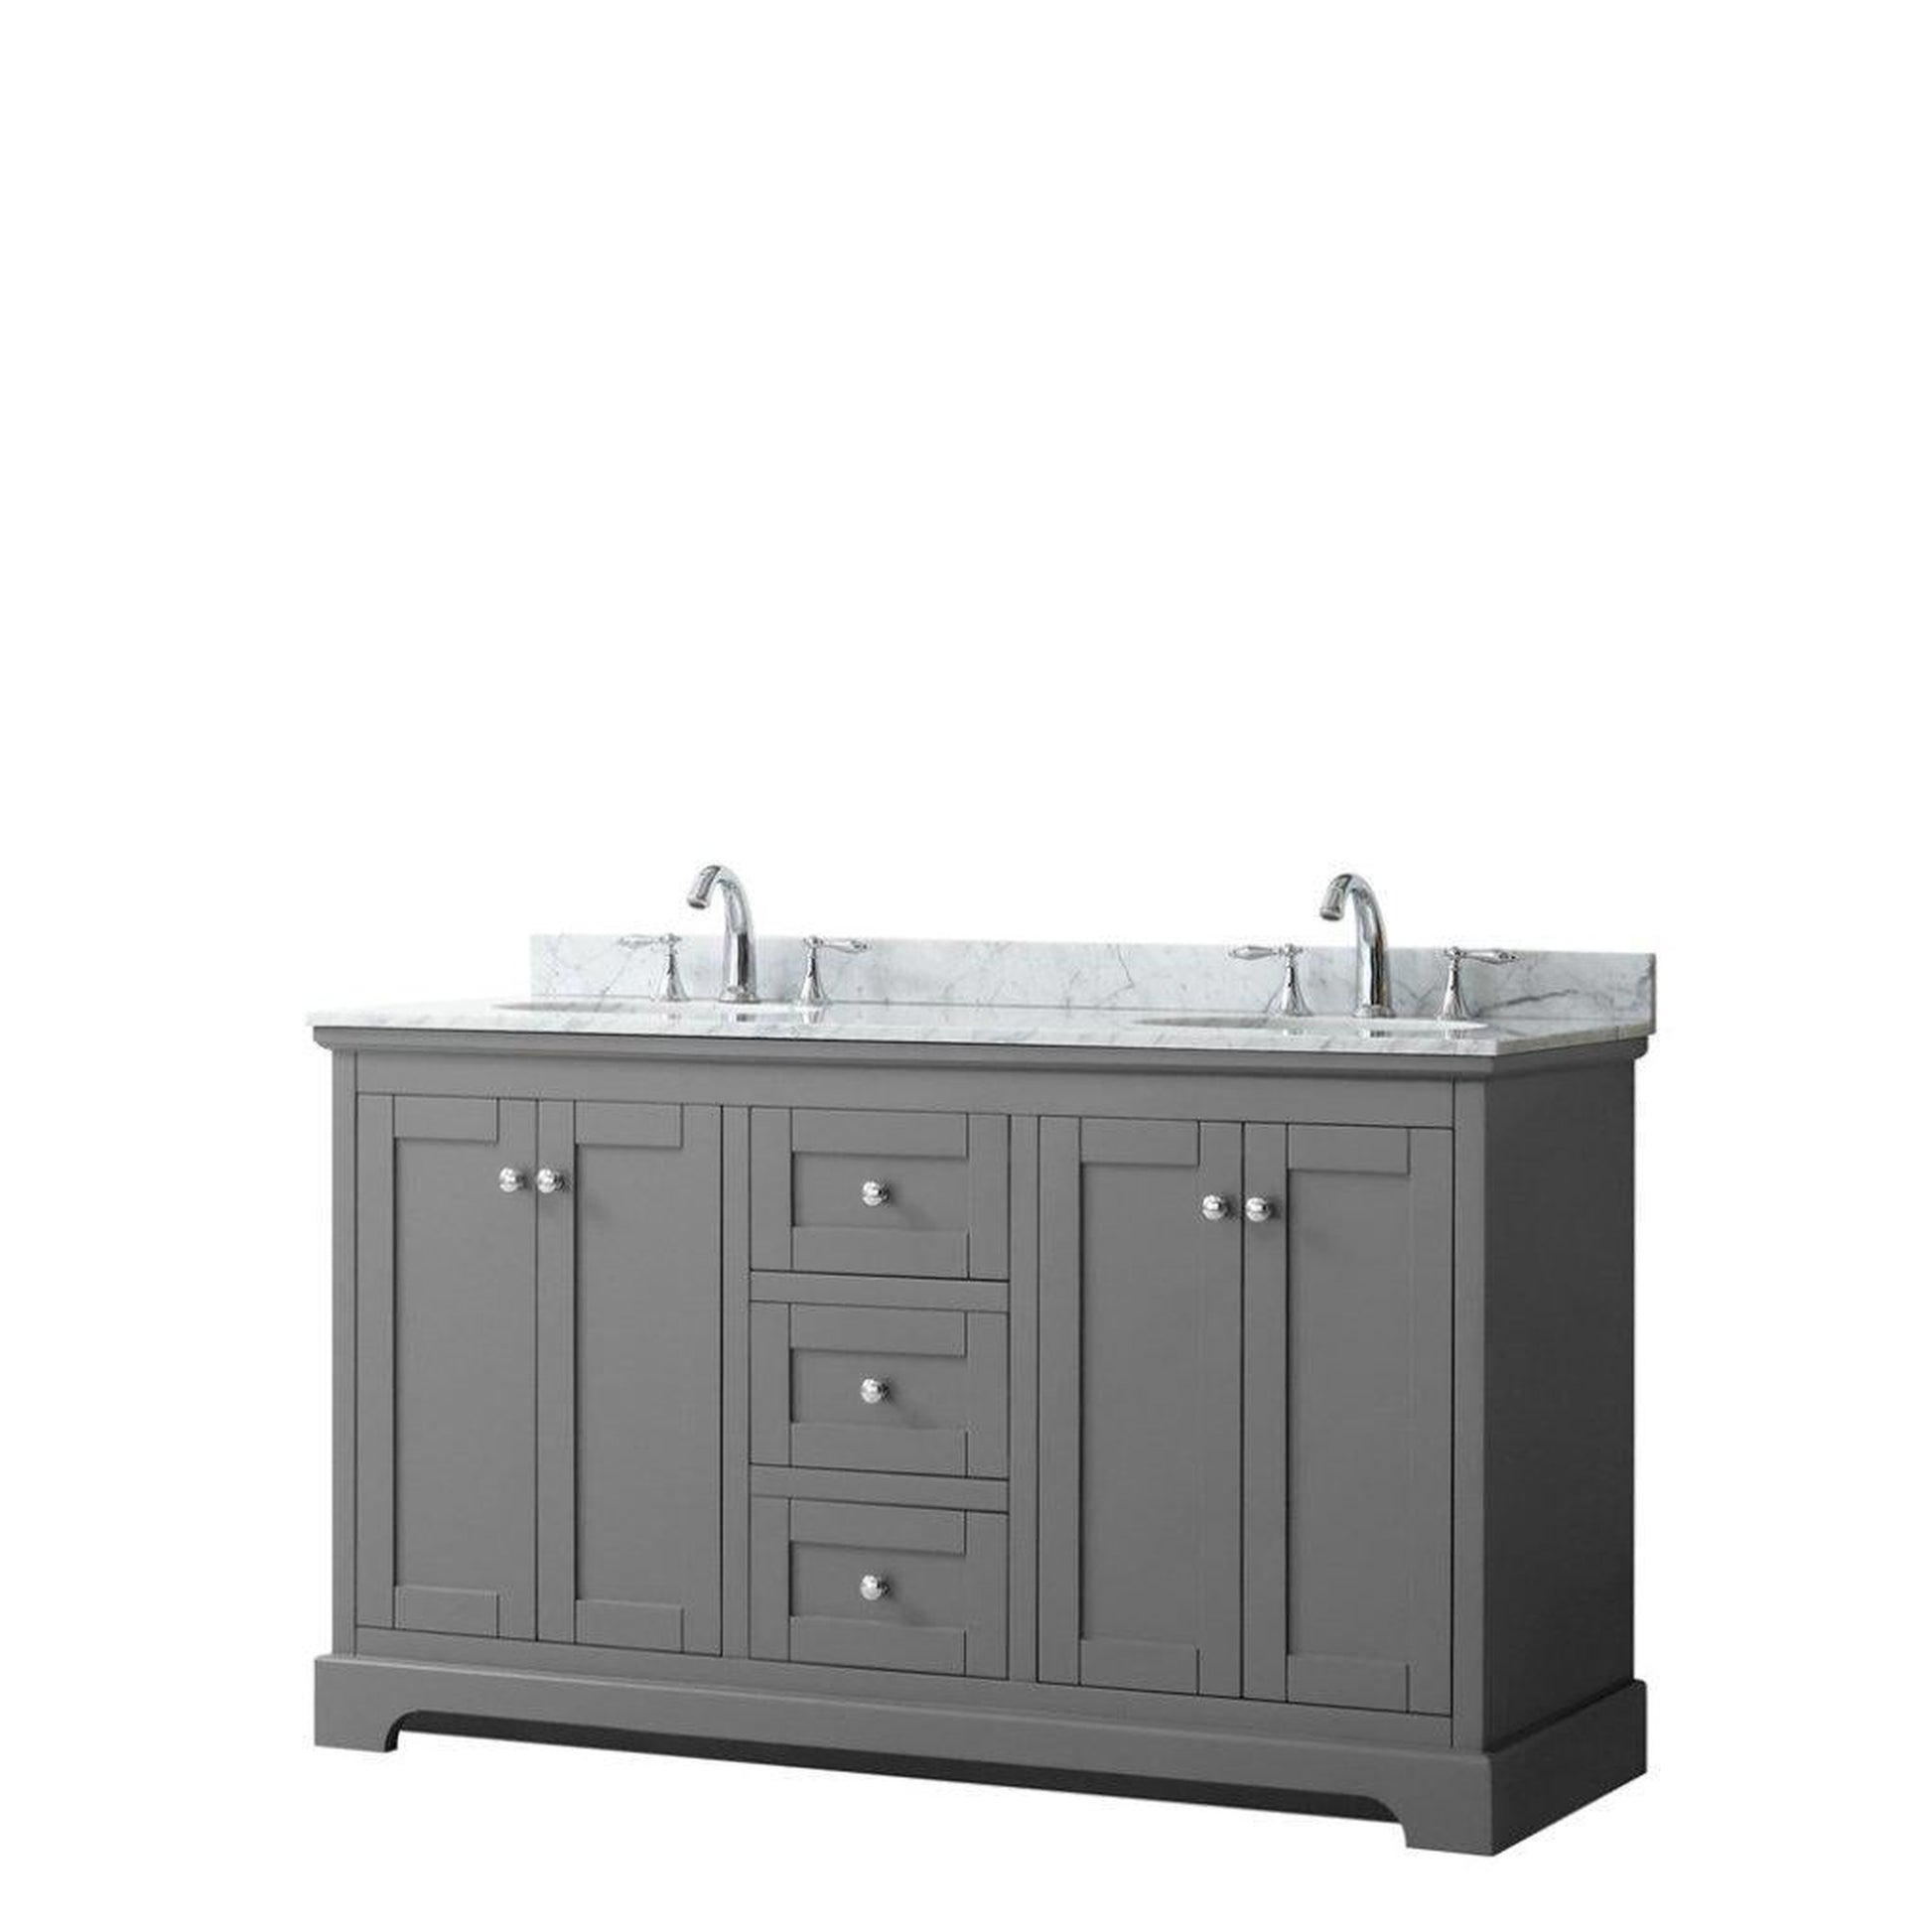 Wyndham Collection Avery 60" Dark Gray Double Bathroom Vanity With White Carrara Marble Countertop With 3-Hole Faucet And 8" Oval Sink